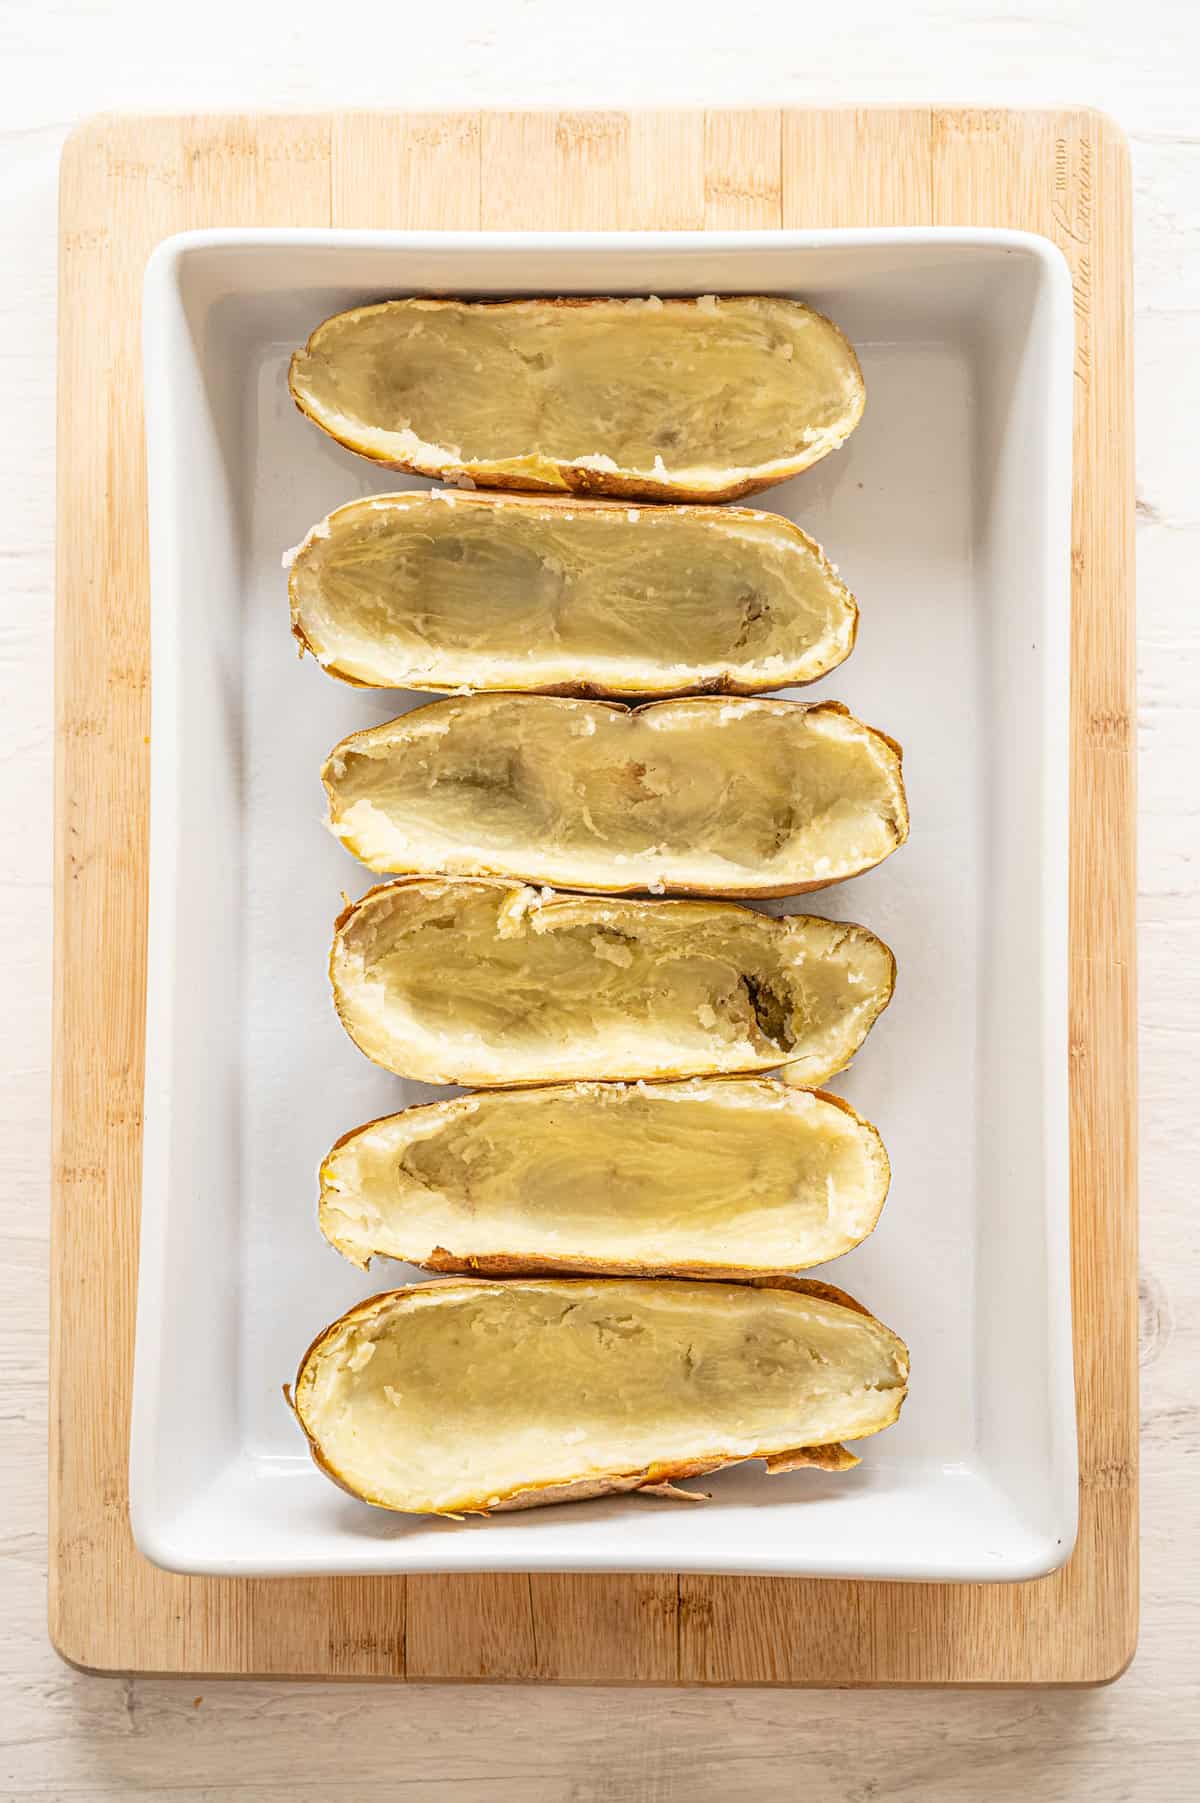 baked potatoes with their insides scooped out